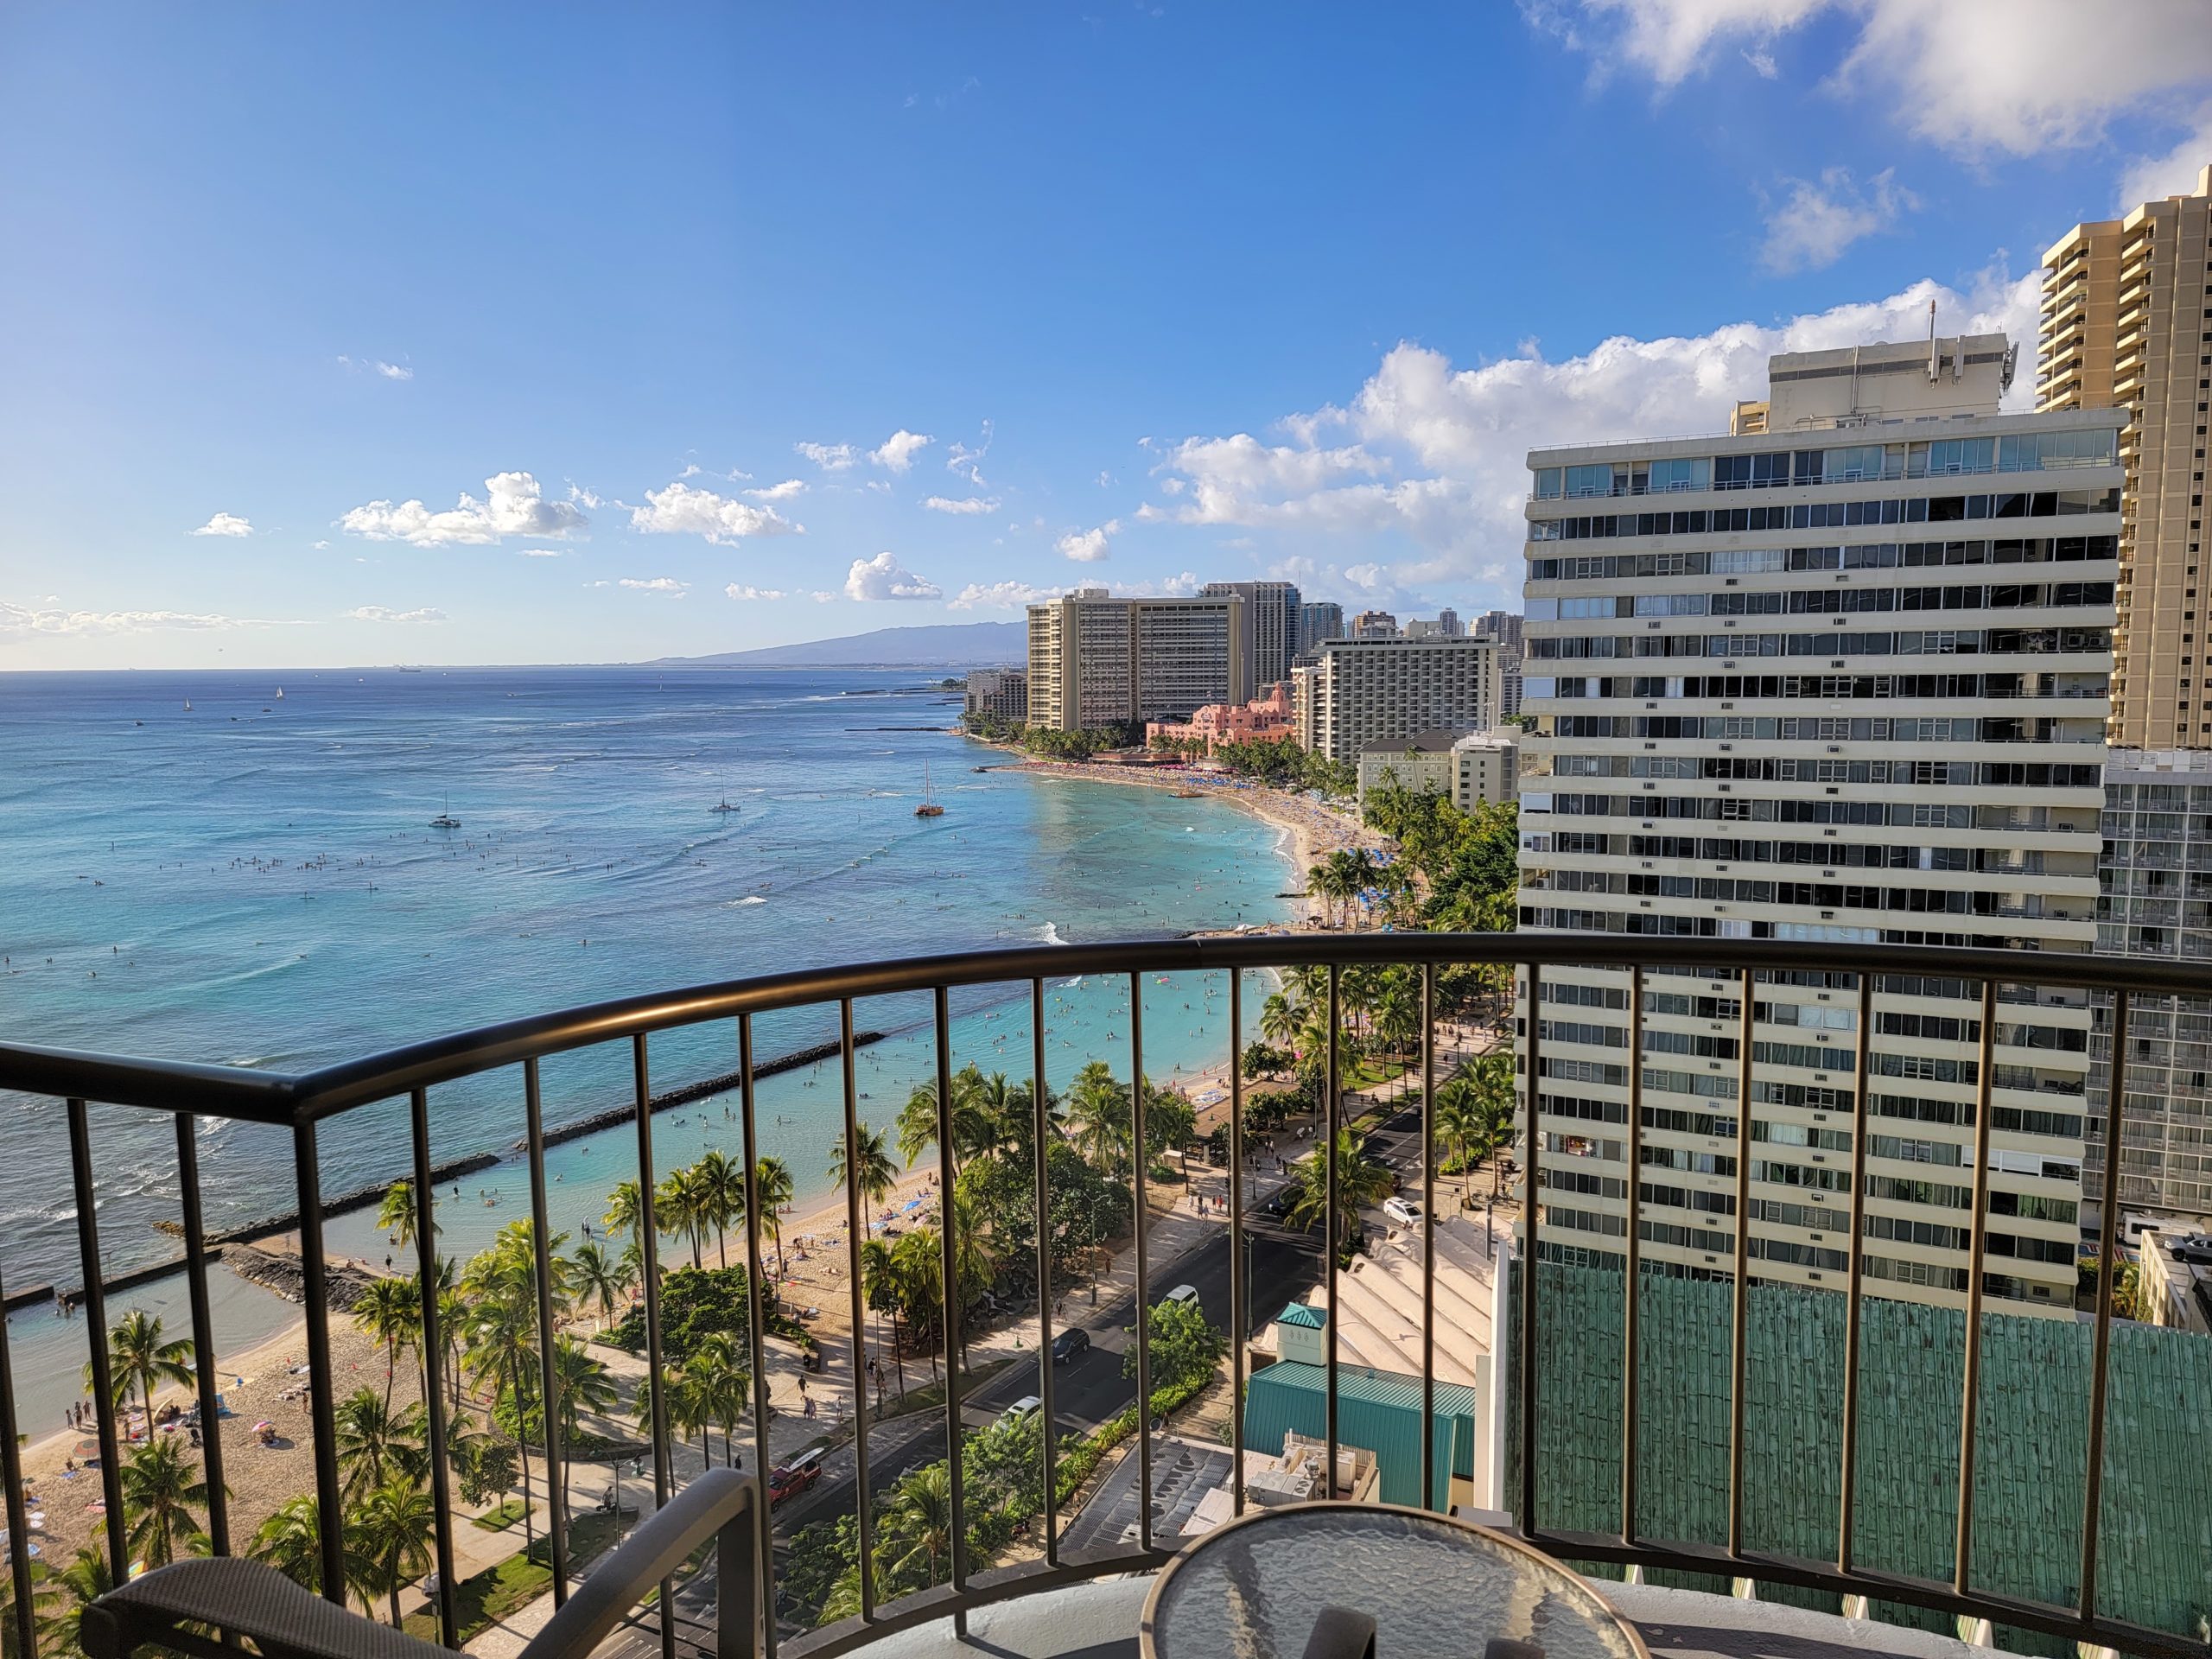 Stay: A Review of the Waikiki Beach Marriott Resort & Spa – WeLeaveToday